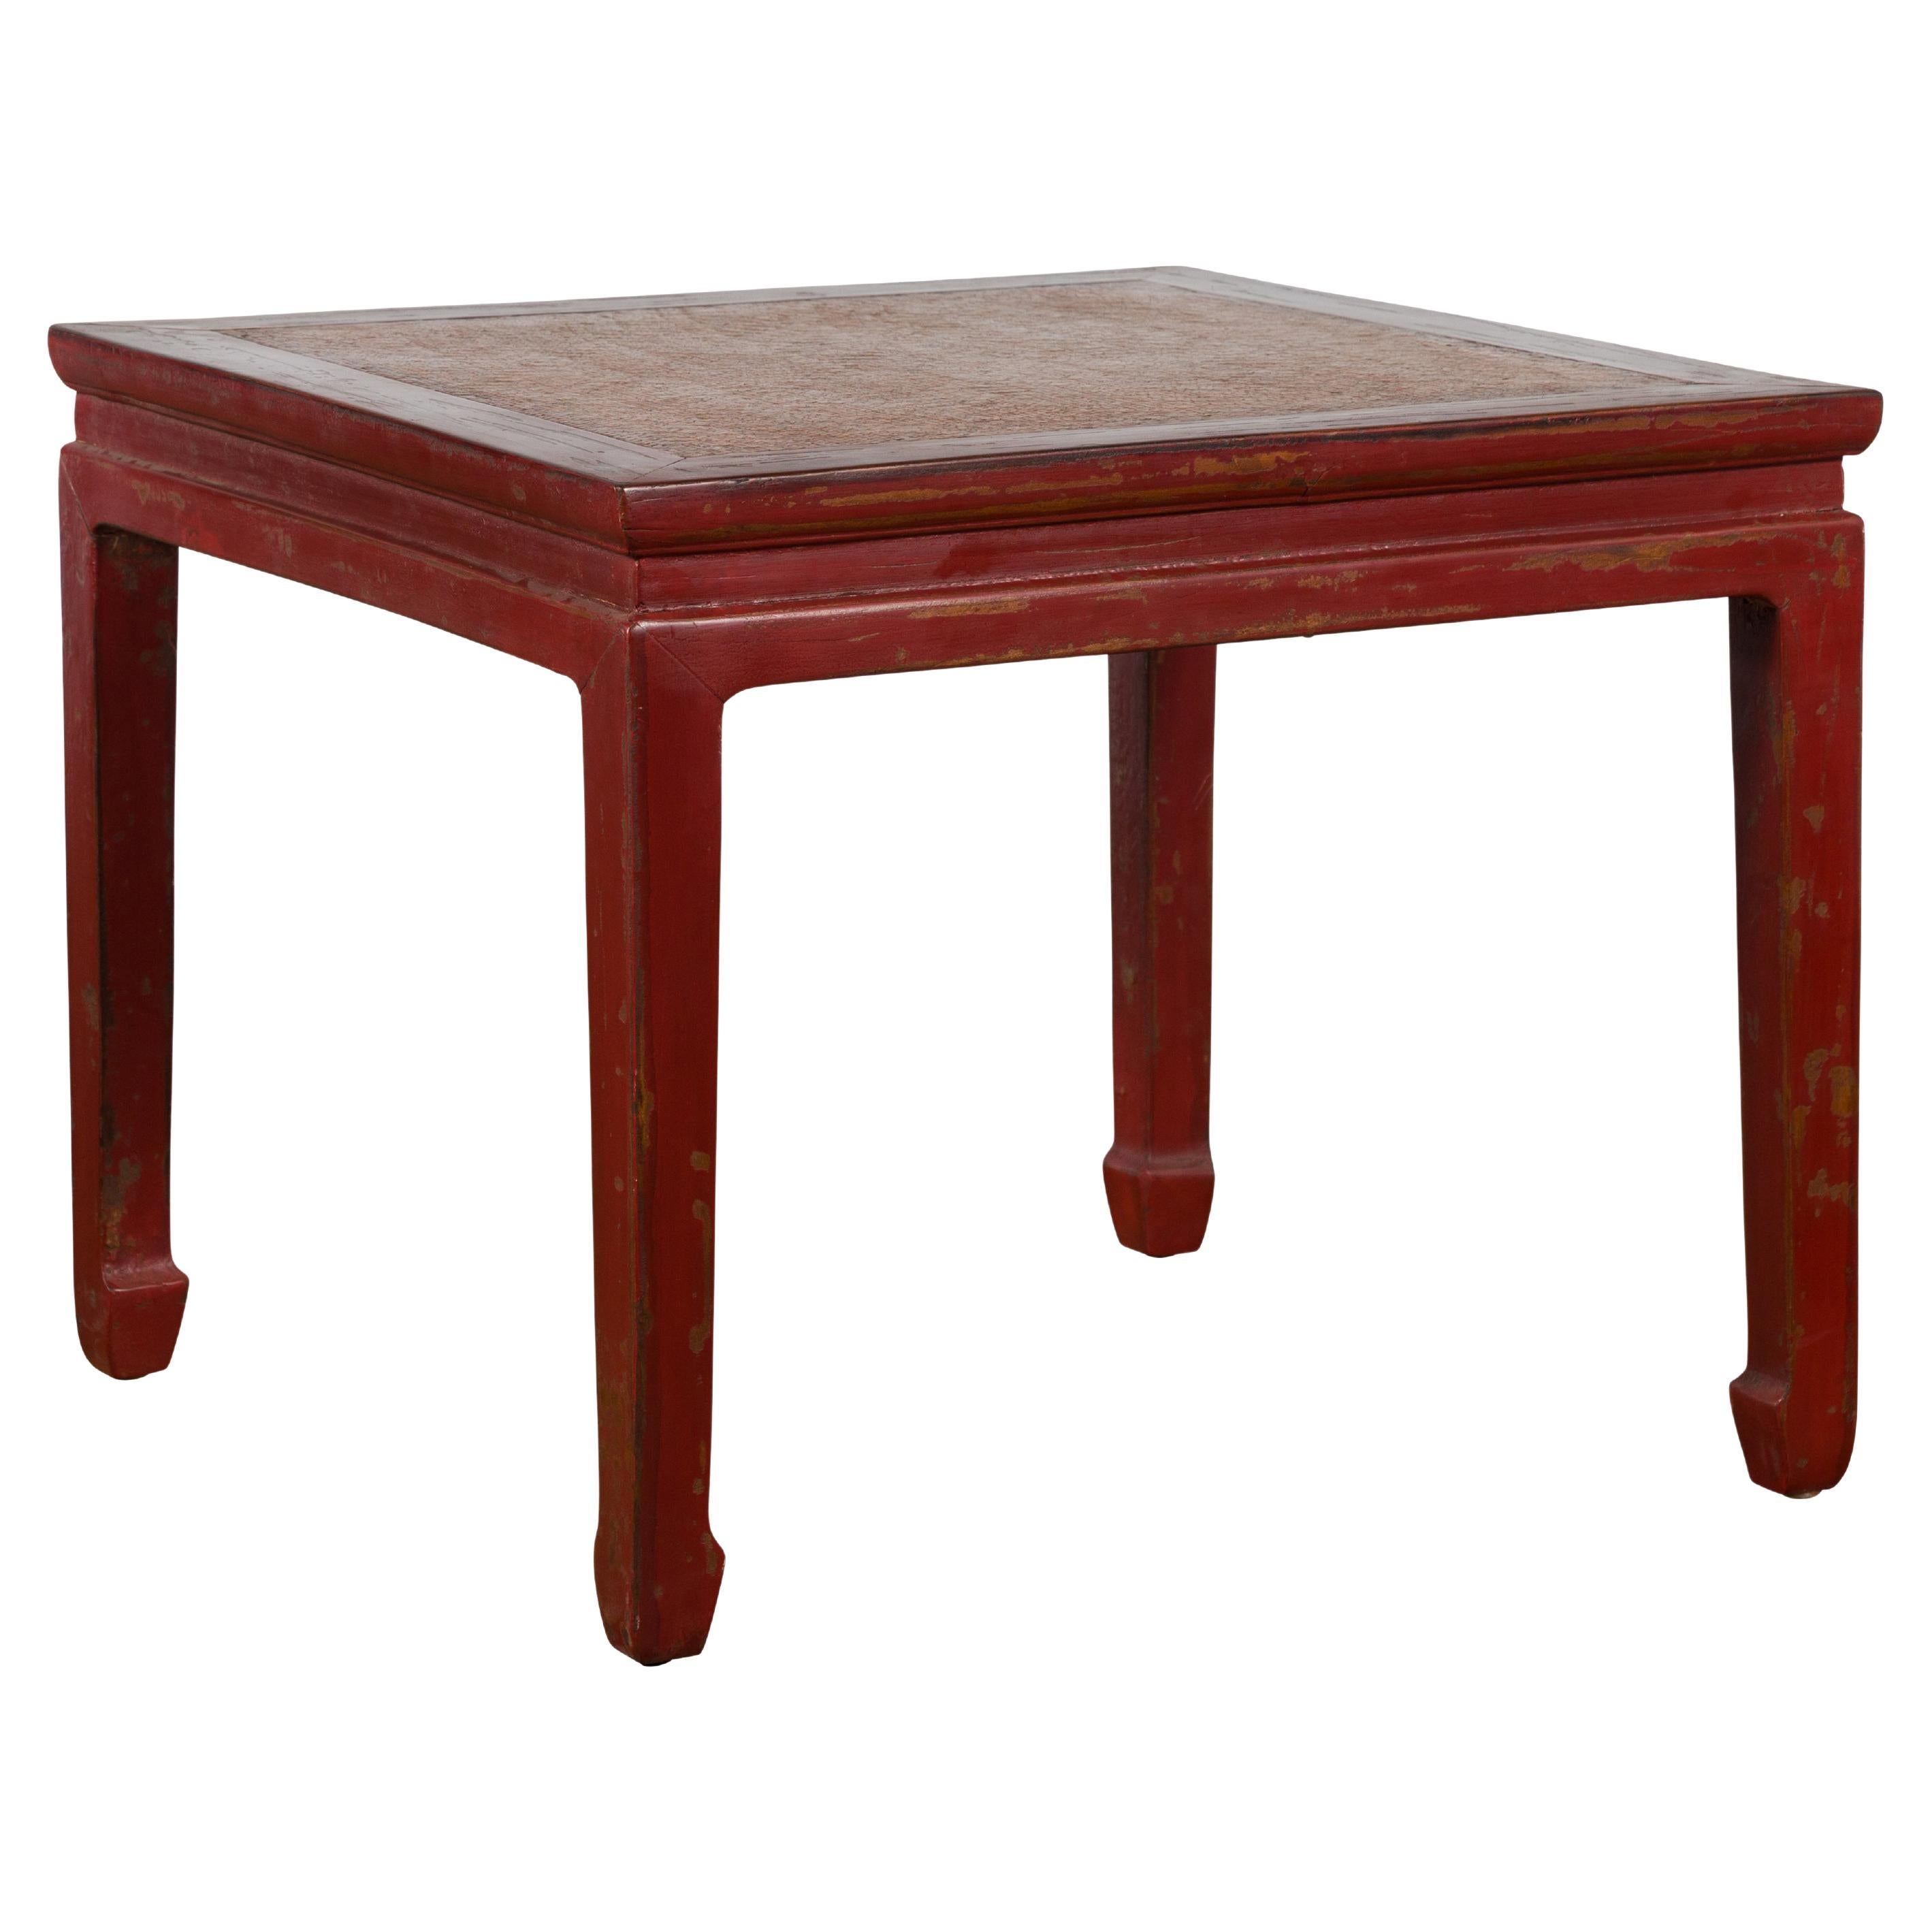 Chinese Qing Dynasty 19th Century Red Lacquer Side Table with Woven Rattan Top For Sale